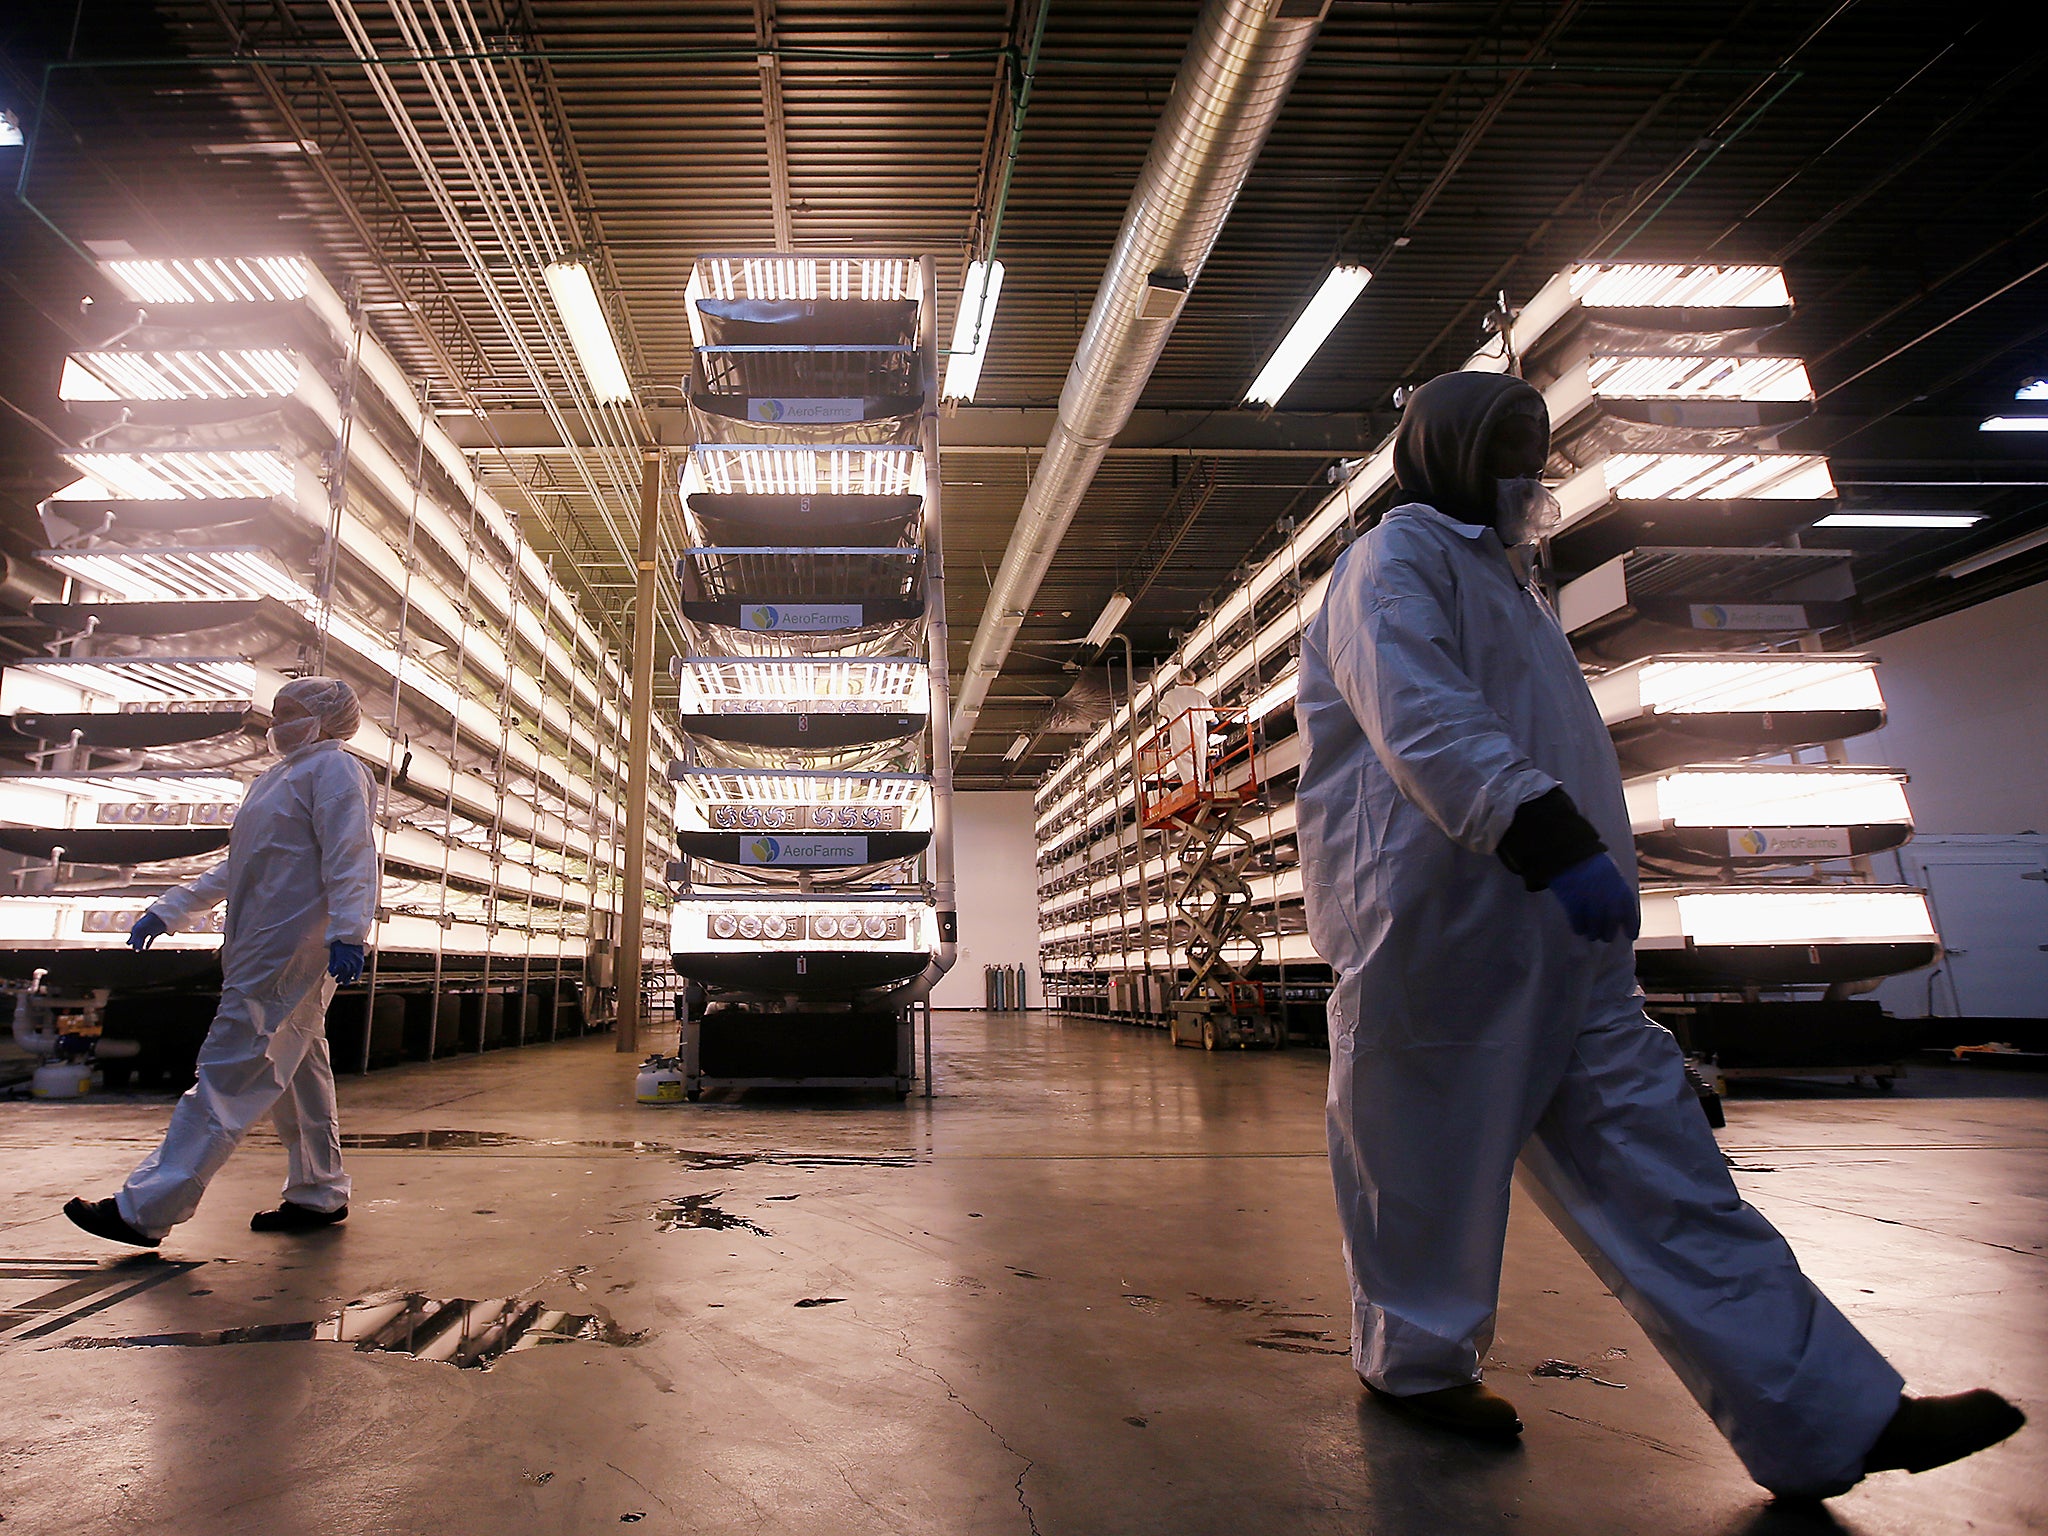 Workers walk near vertical farming beds at an AeroFarms Inc. facility in Newark, New Jersey